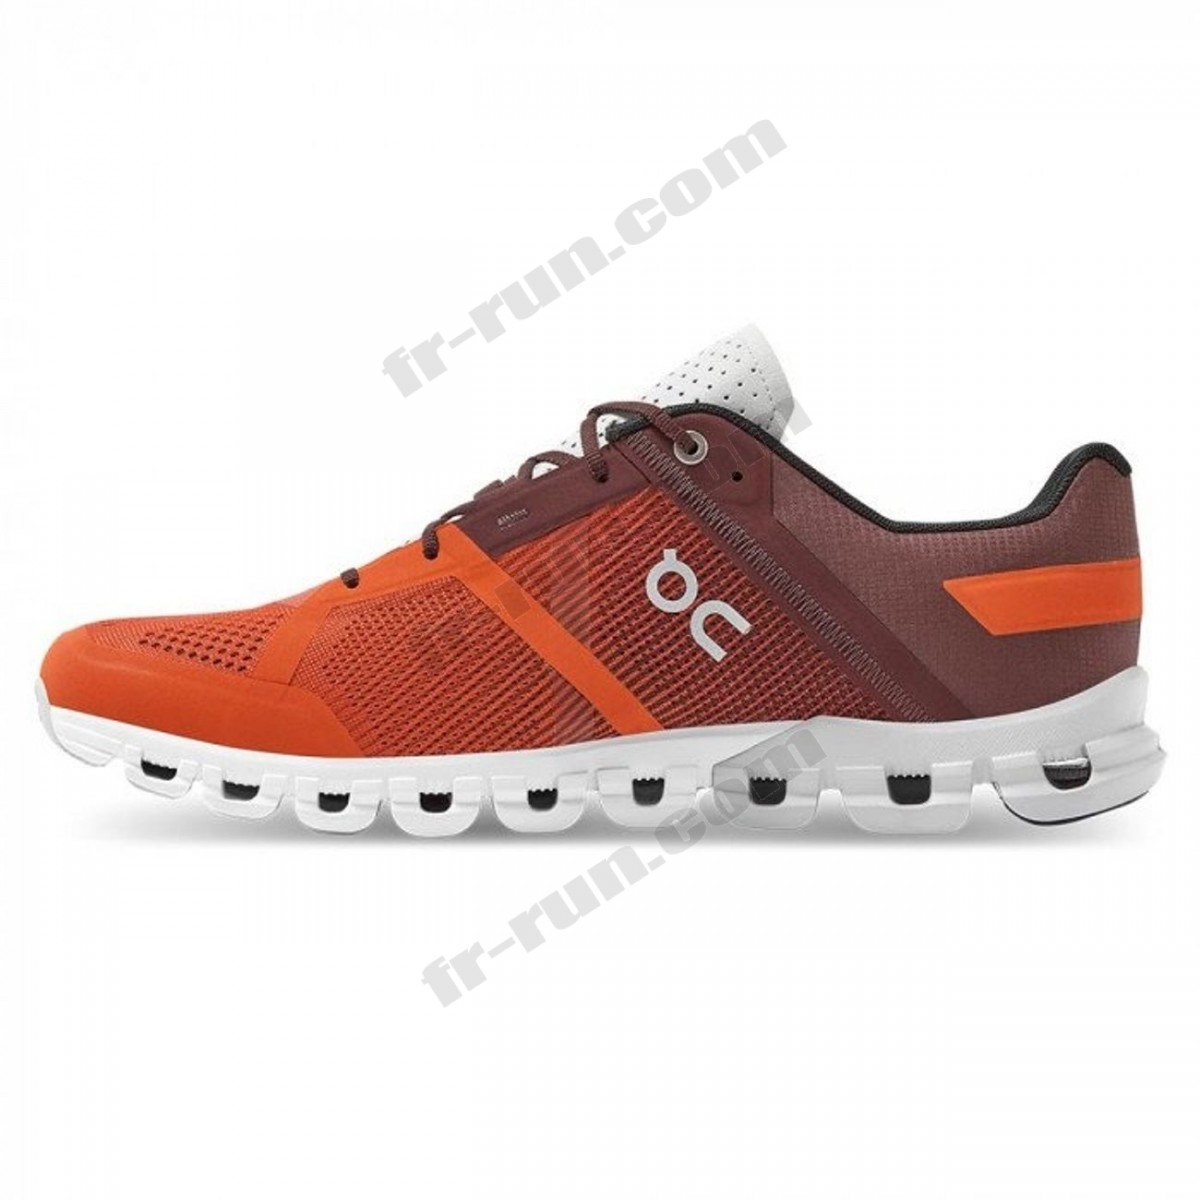 On/CHAUSSURES BASSES running femme ON CLOUDFLOW √ Nouveau style √ Soldes - -1